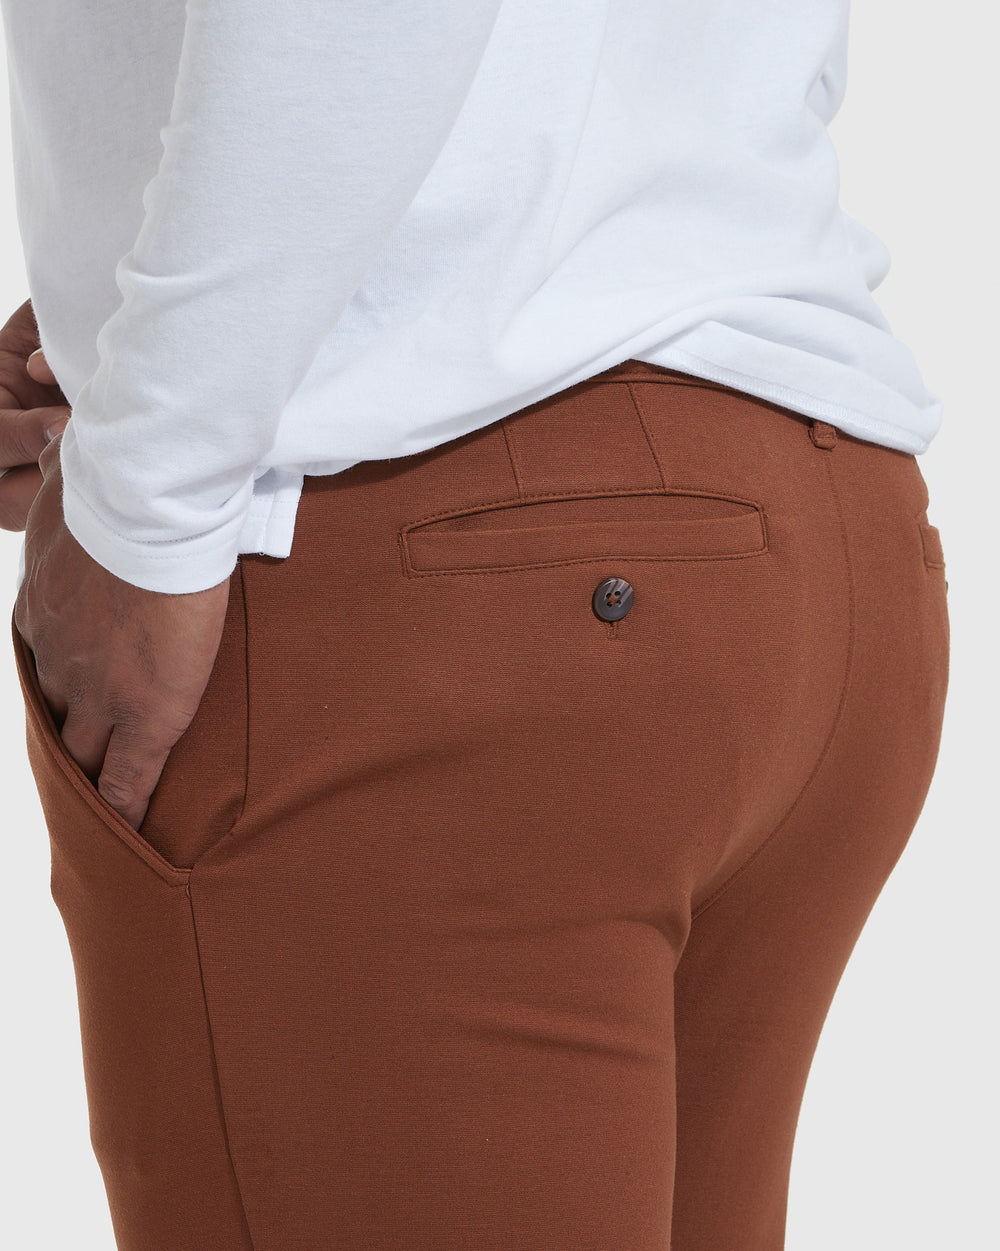 Suede Brown Slim Comfort Knit Chino Pant